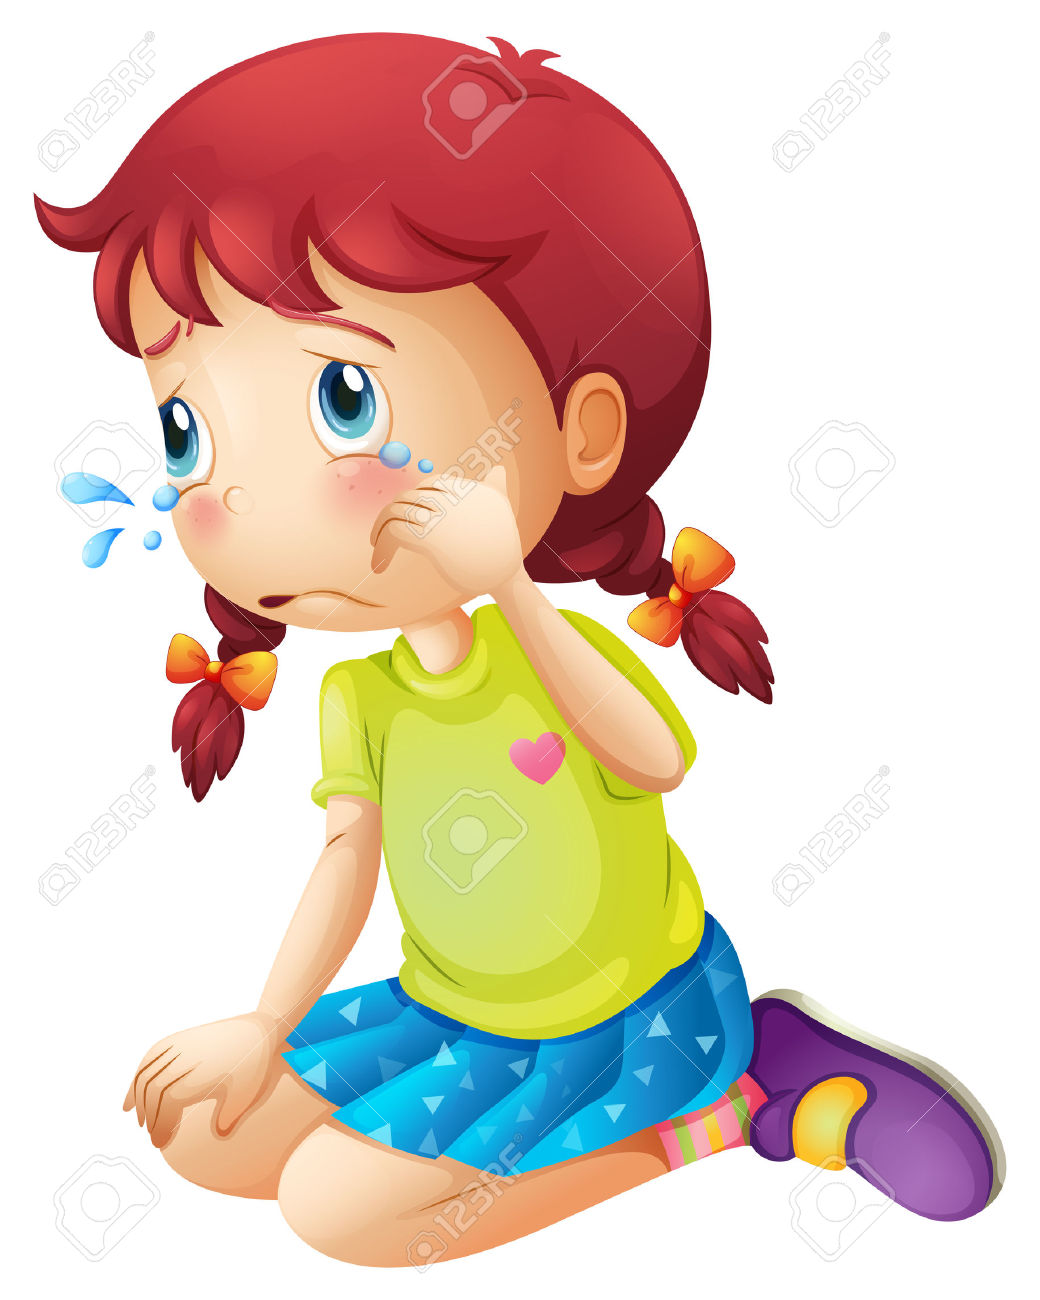 Crying clipart Crying Woman Clipart #8